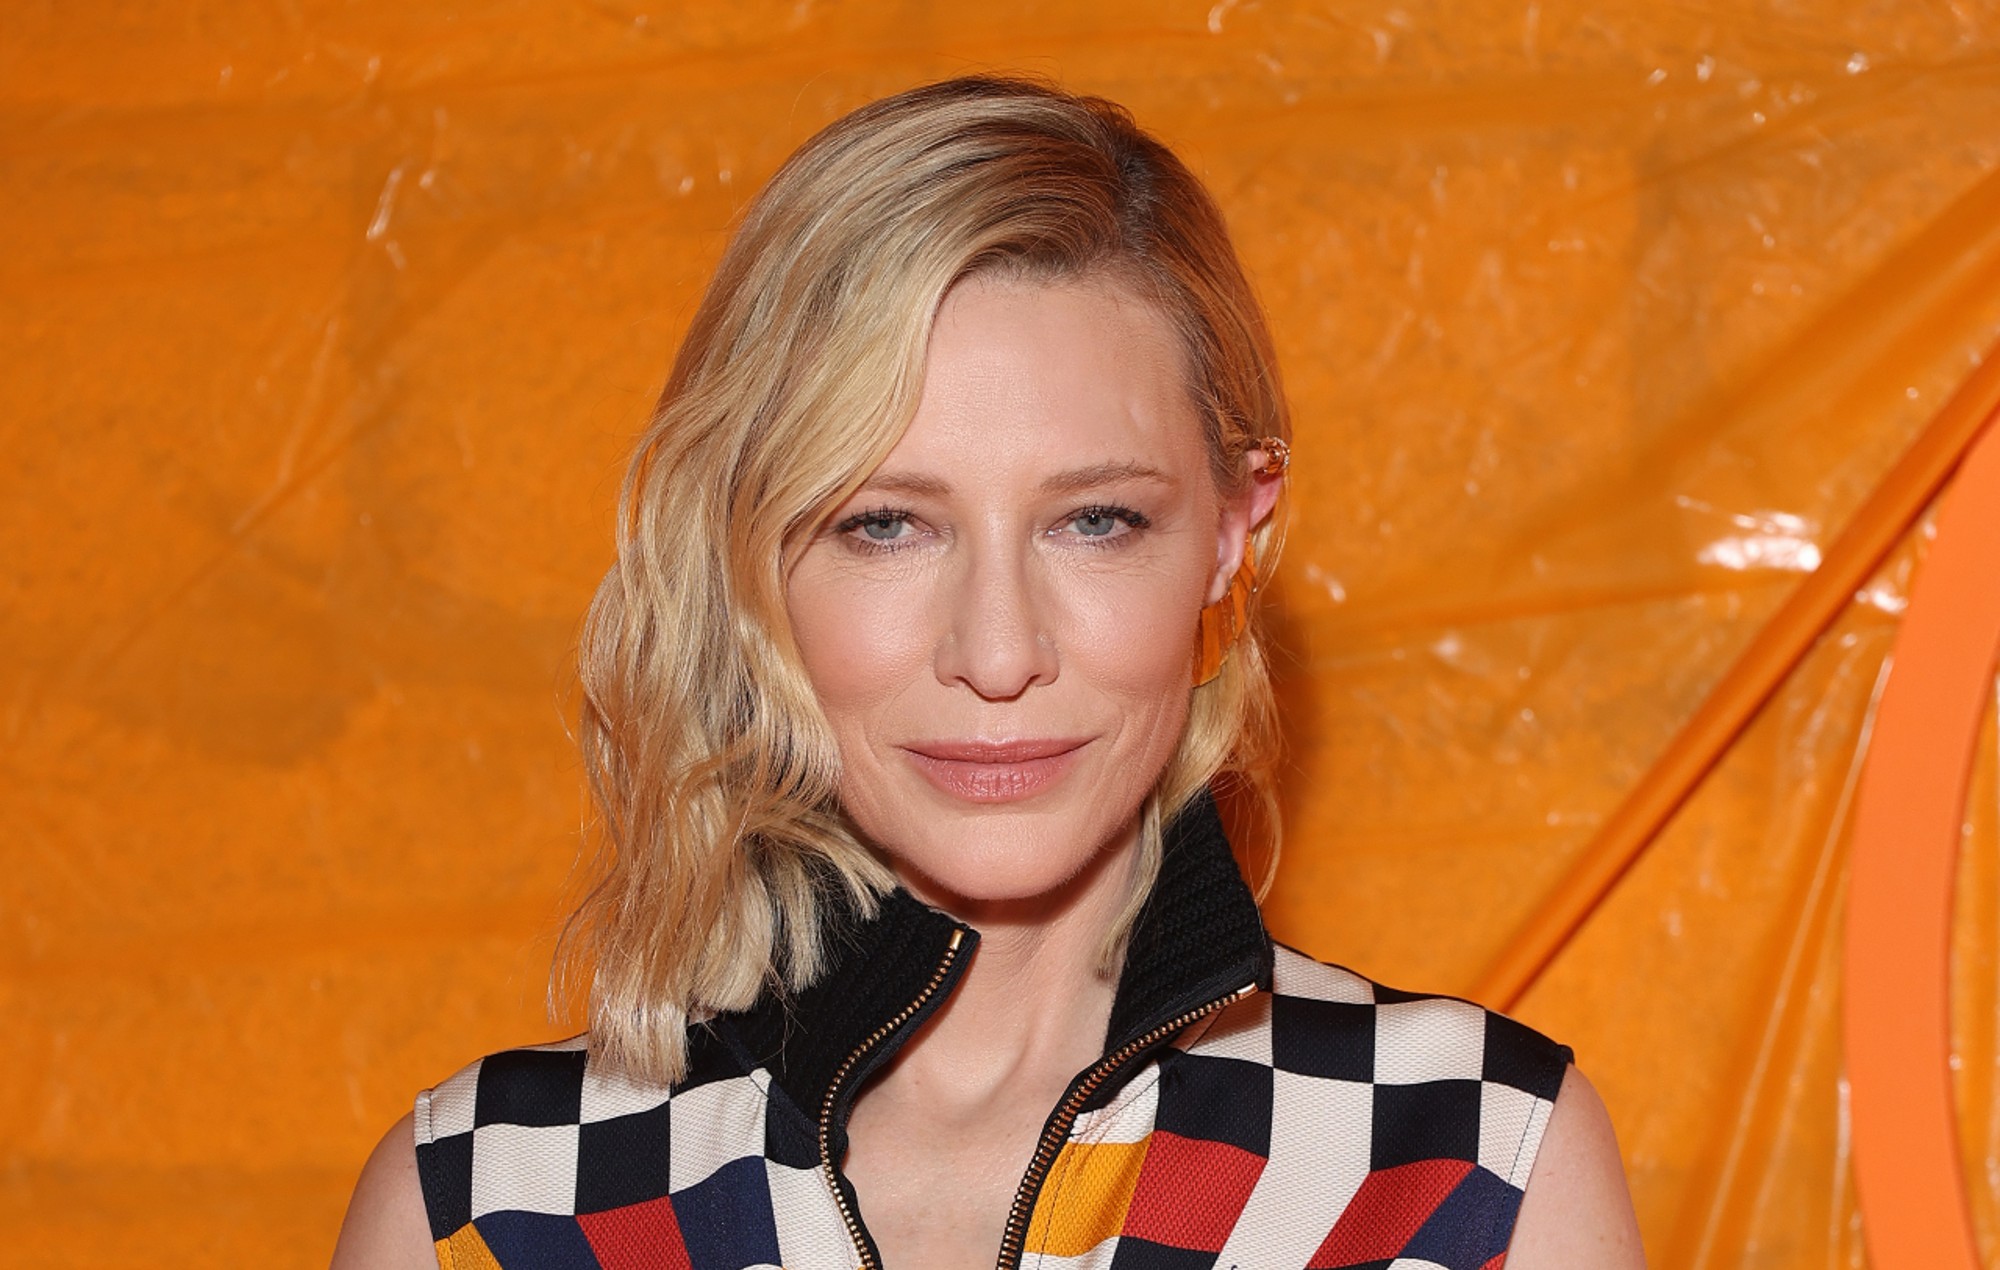 Cate Blanchett’s home renovation is making “lives a misery” for her Cornish neighbours